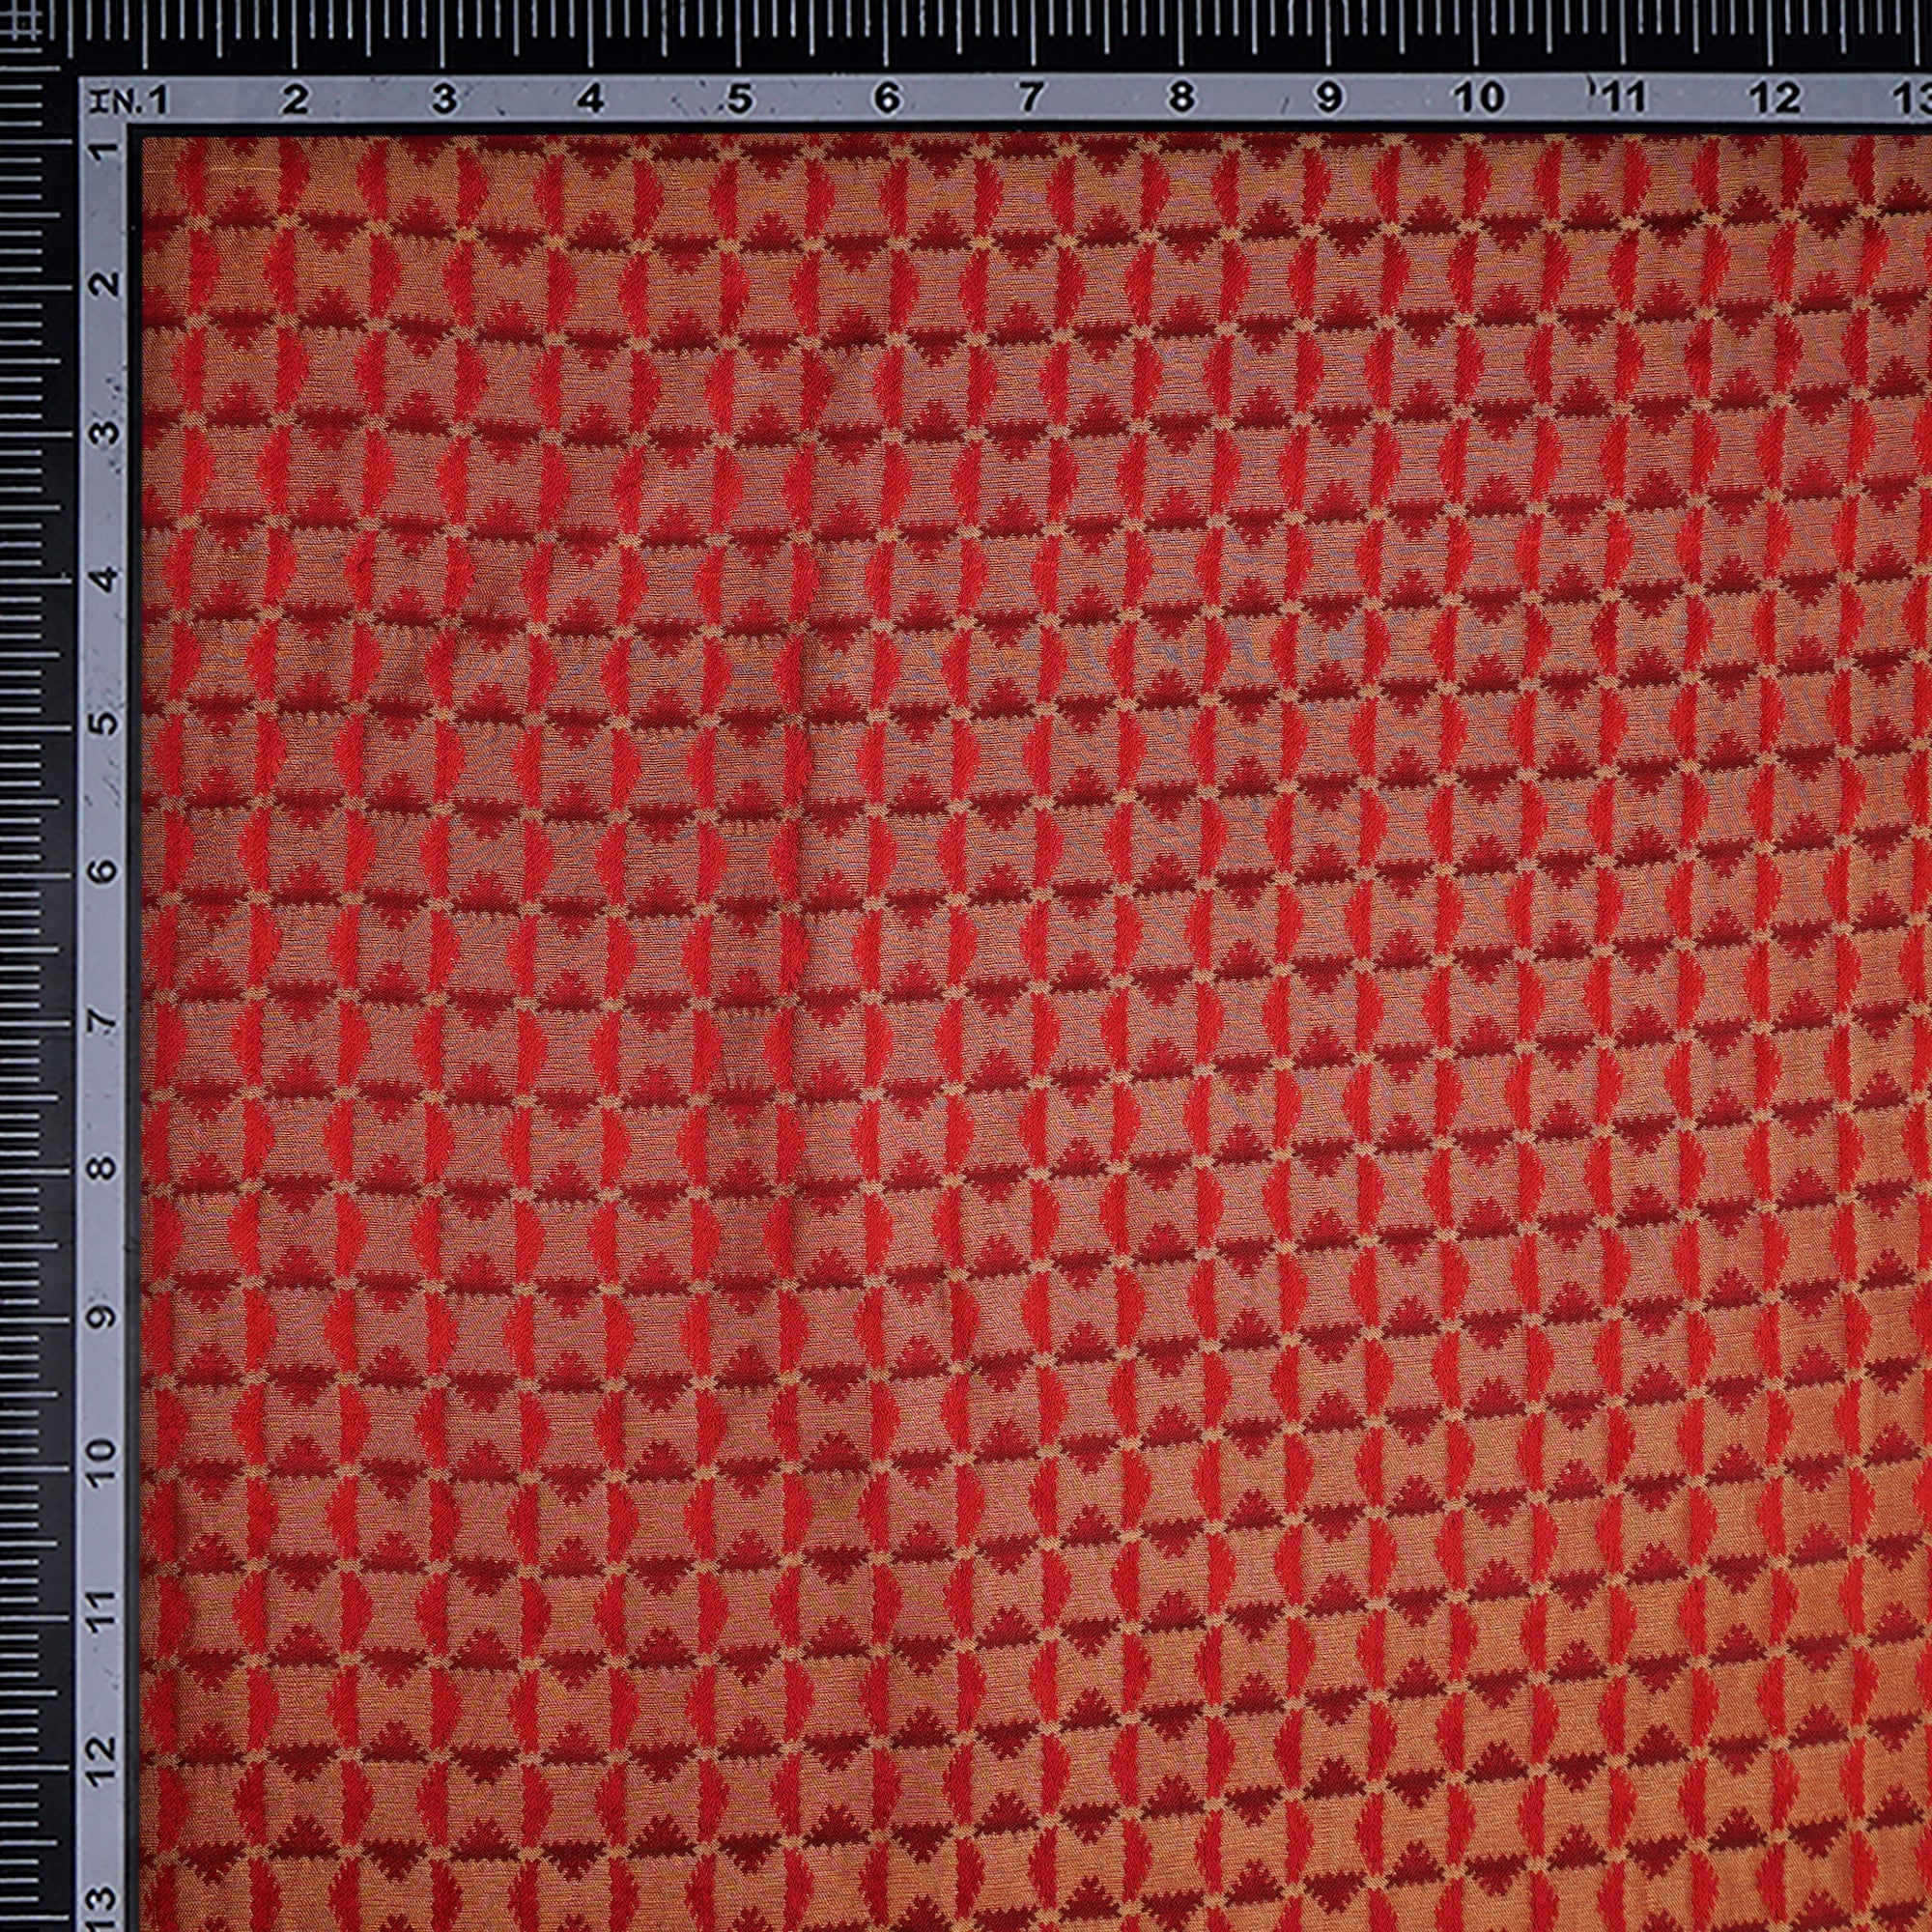 Red-Golden Color Crepe Brocade Fabric